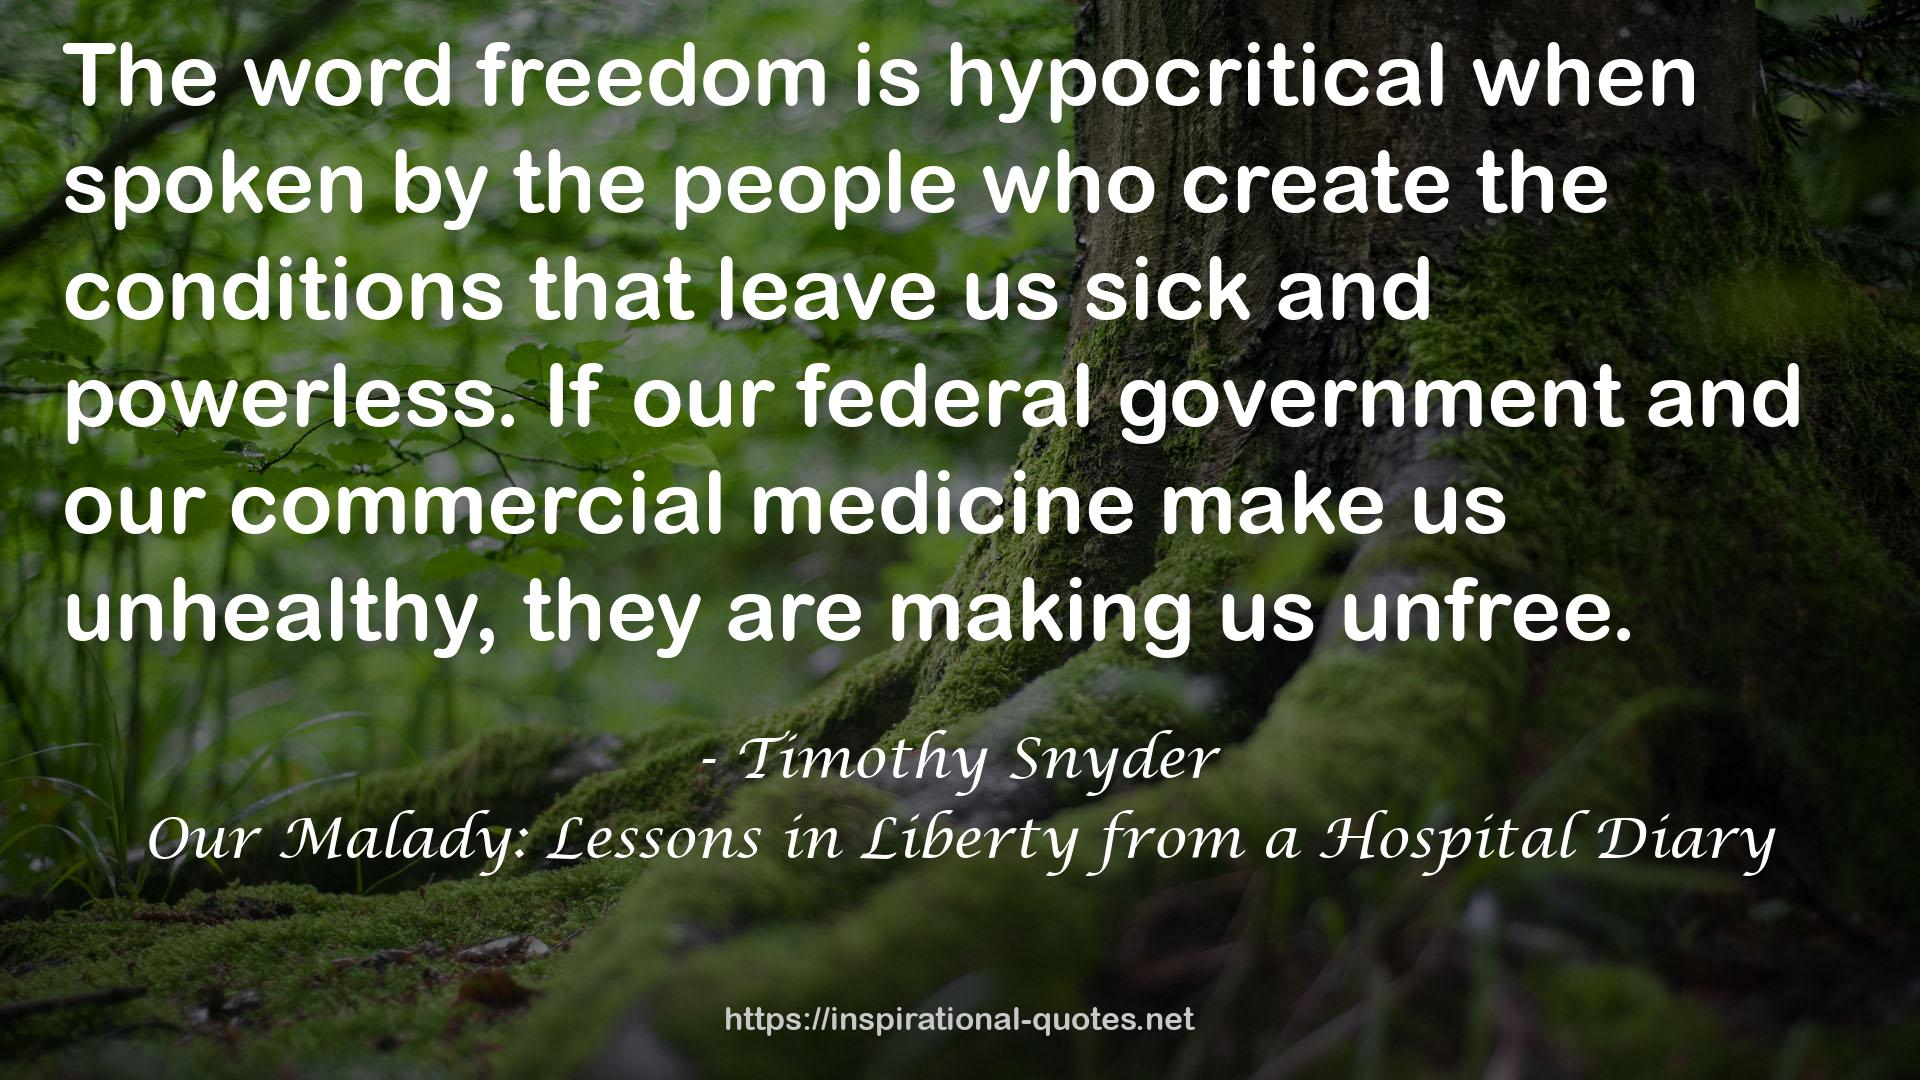 Our Malady: Lessons in Liberty from a Hospital Diary QUOTES